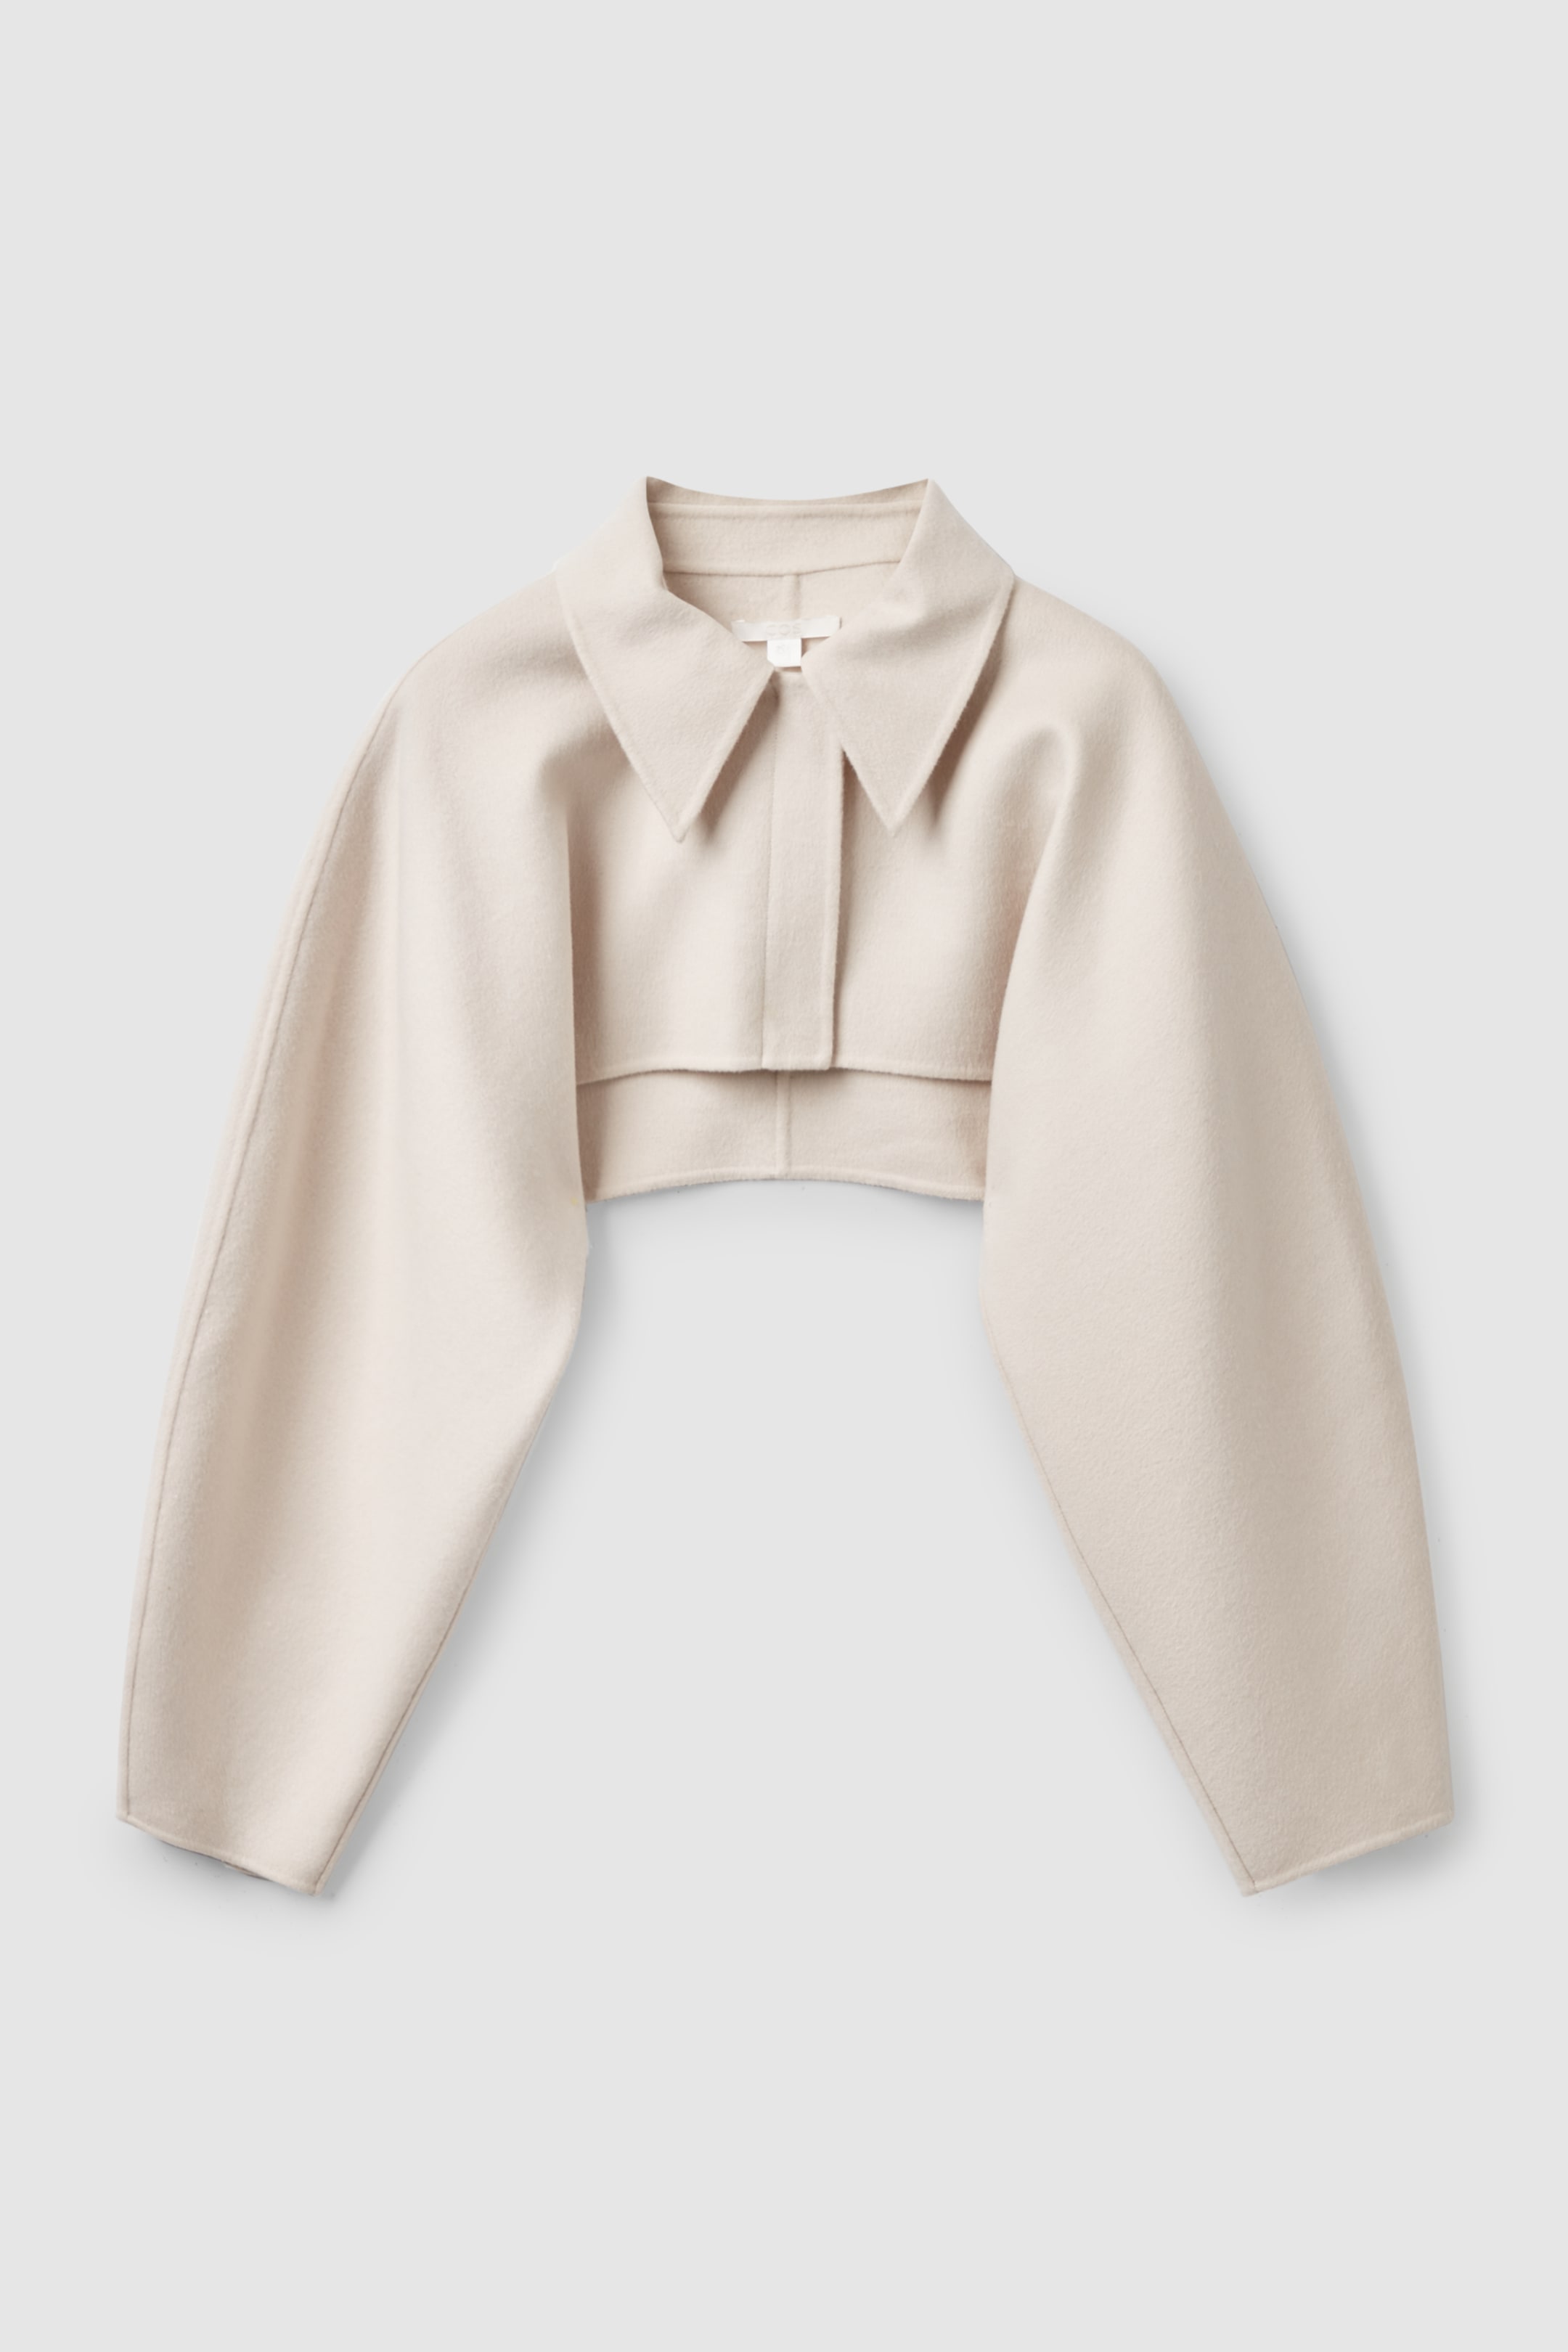 Front image of cos CROPPED BOLERO JACKET in off-white